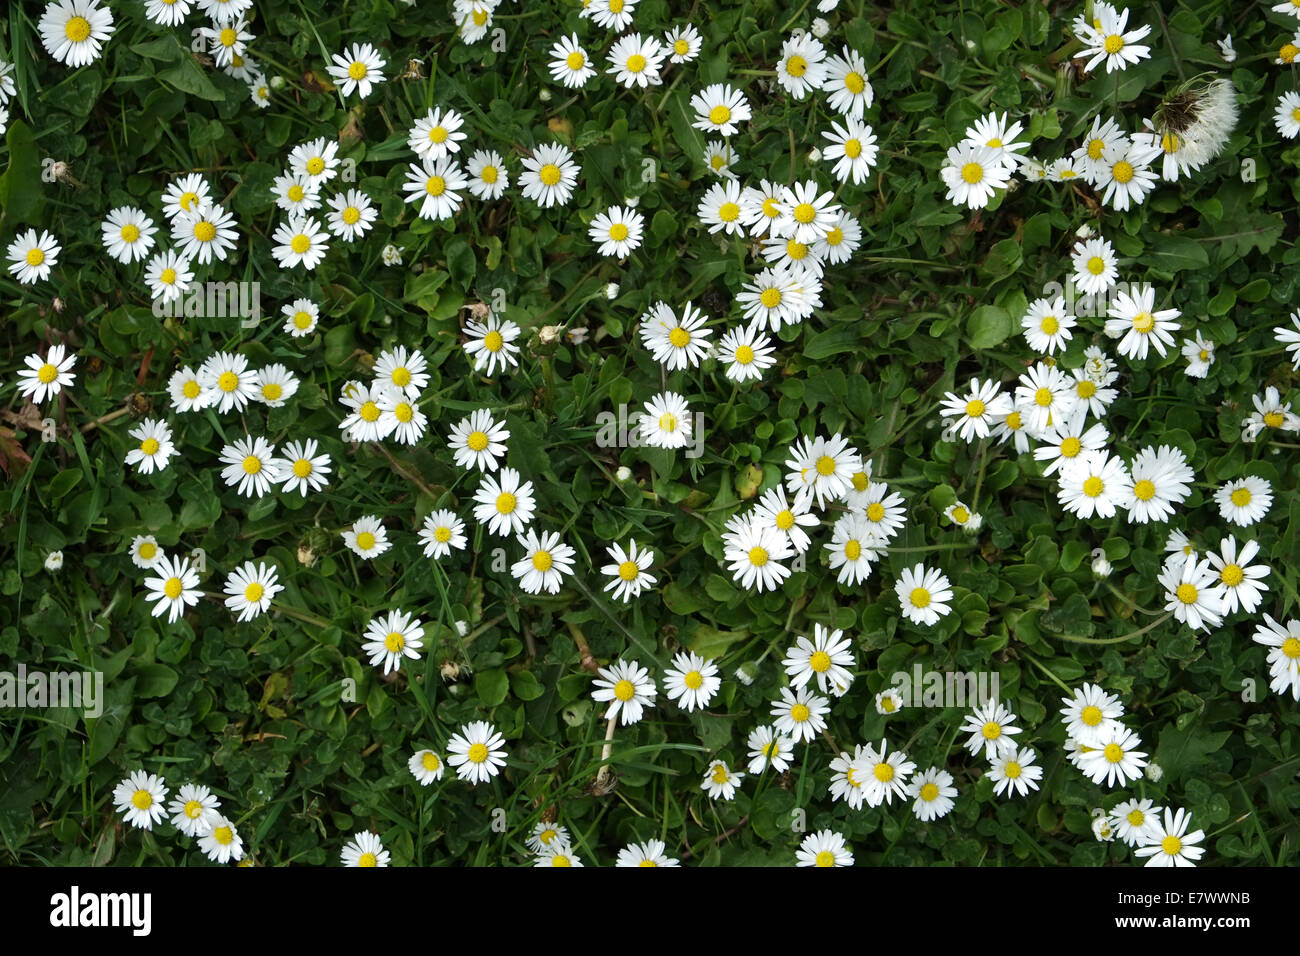 floor of daisy flowers growing in green grass lawn Stock Photo